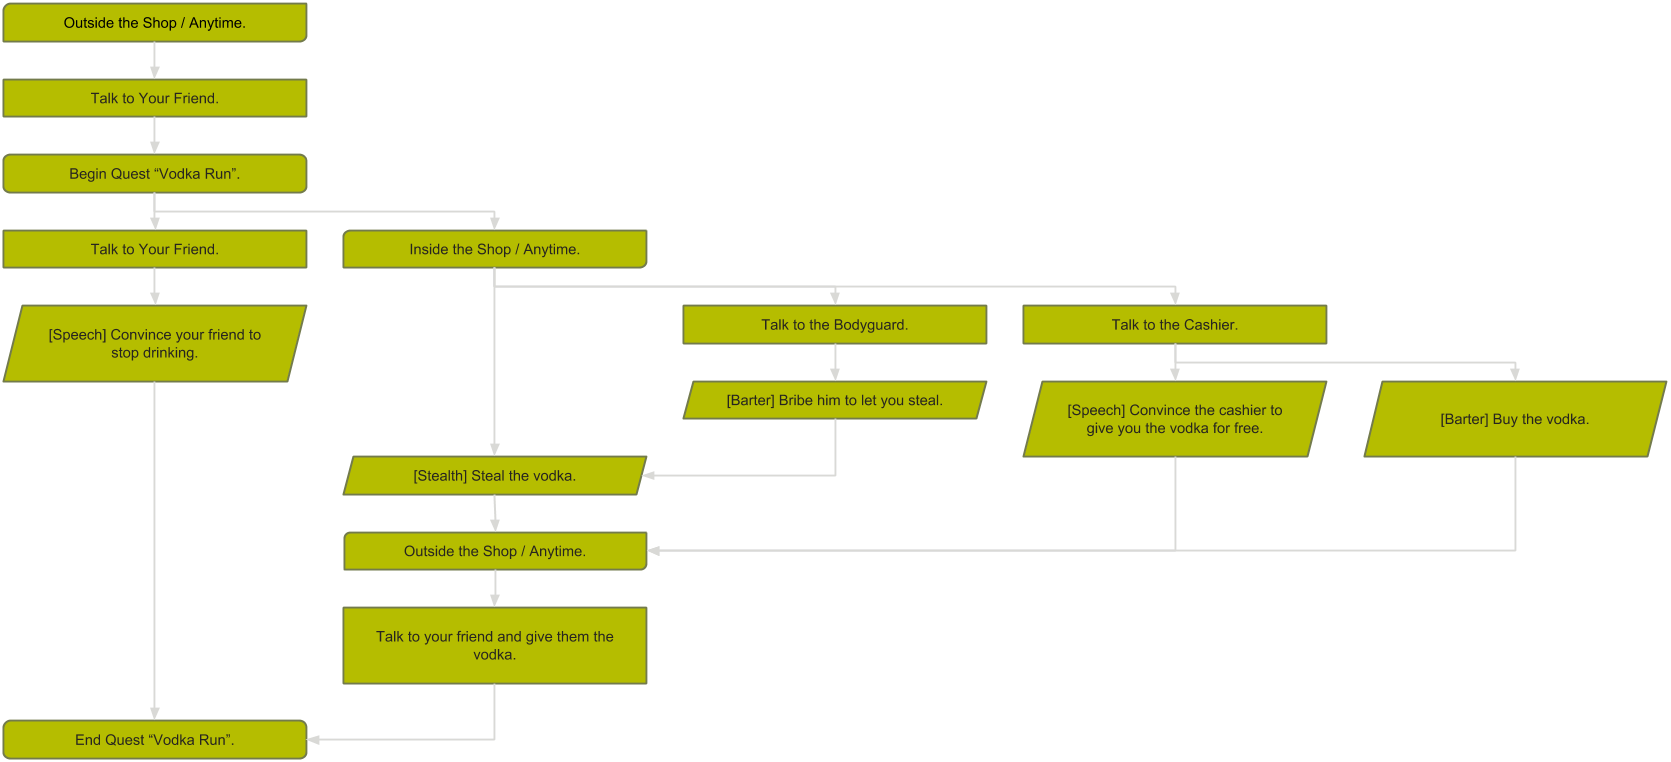 An example flowchart of the quest design.